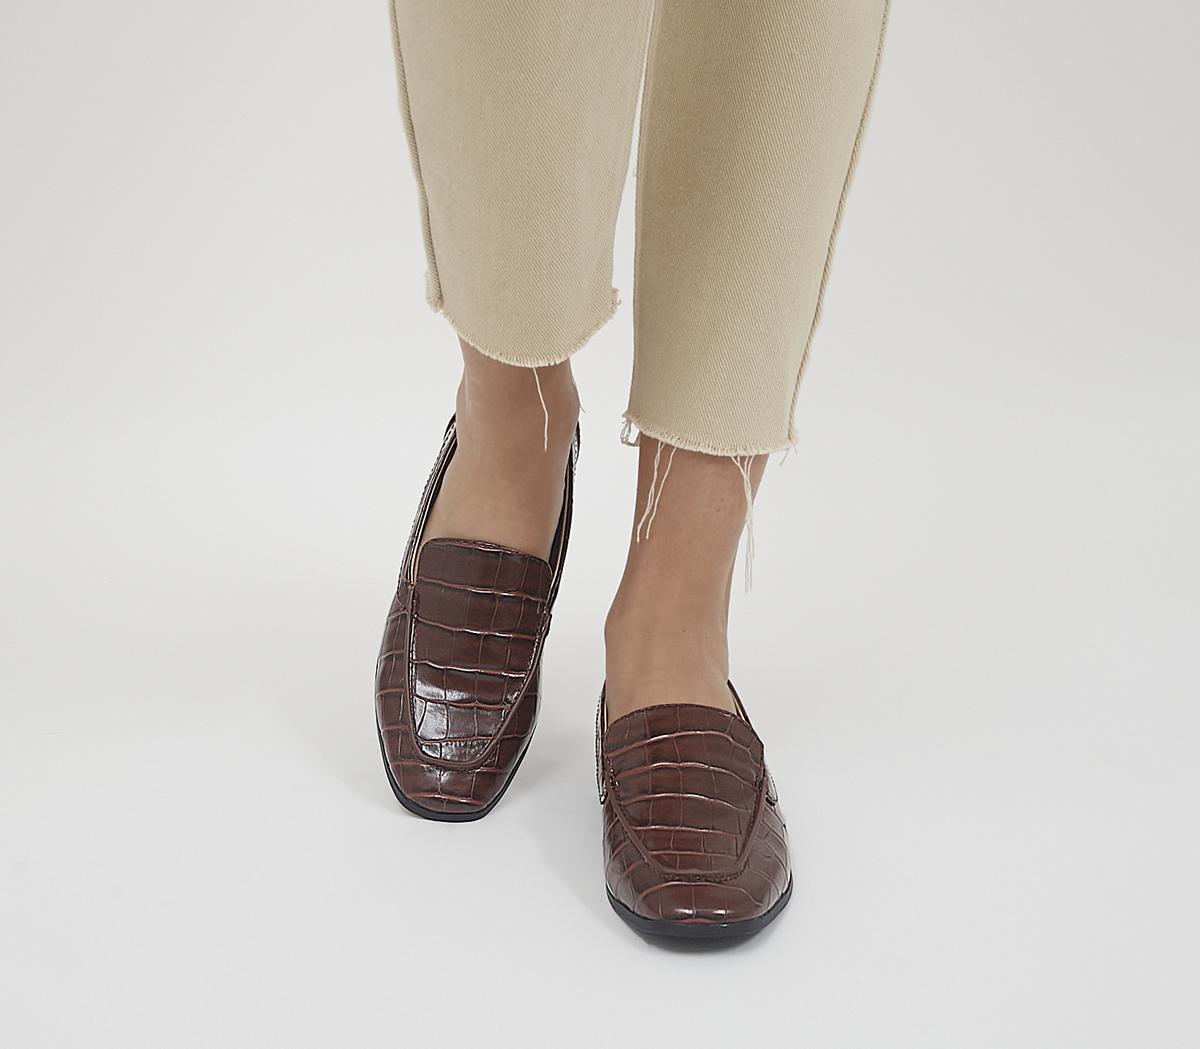 OfficeFabric Soft Square LoafersBrown Croc